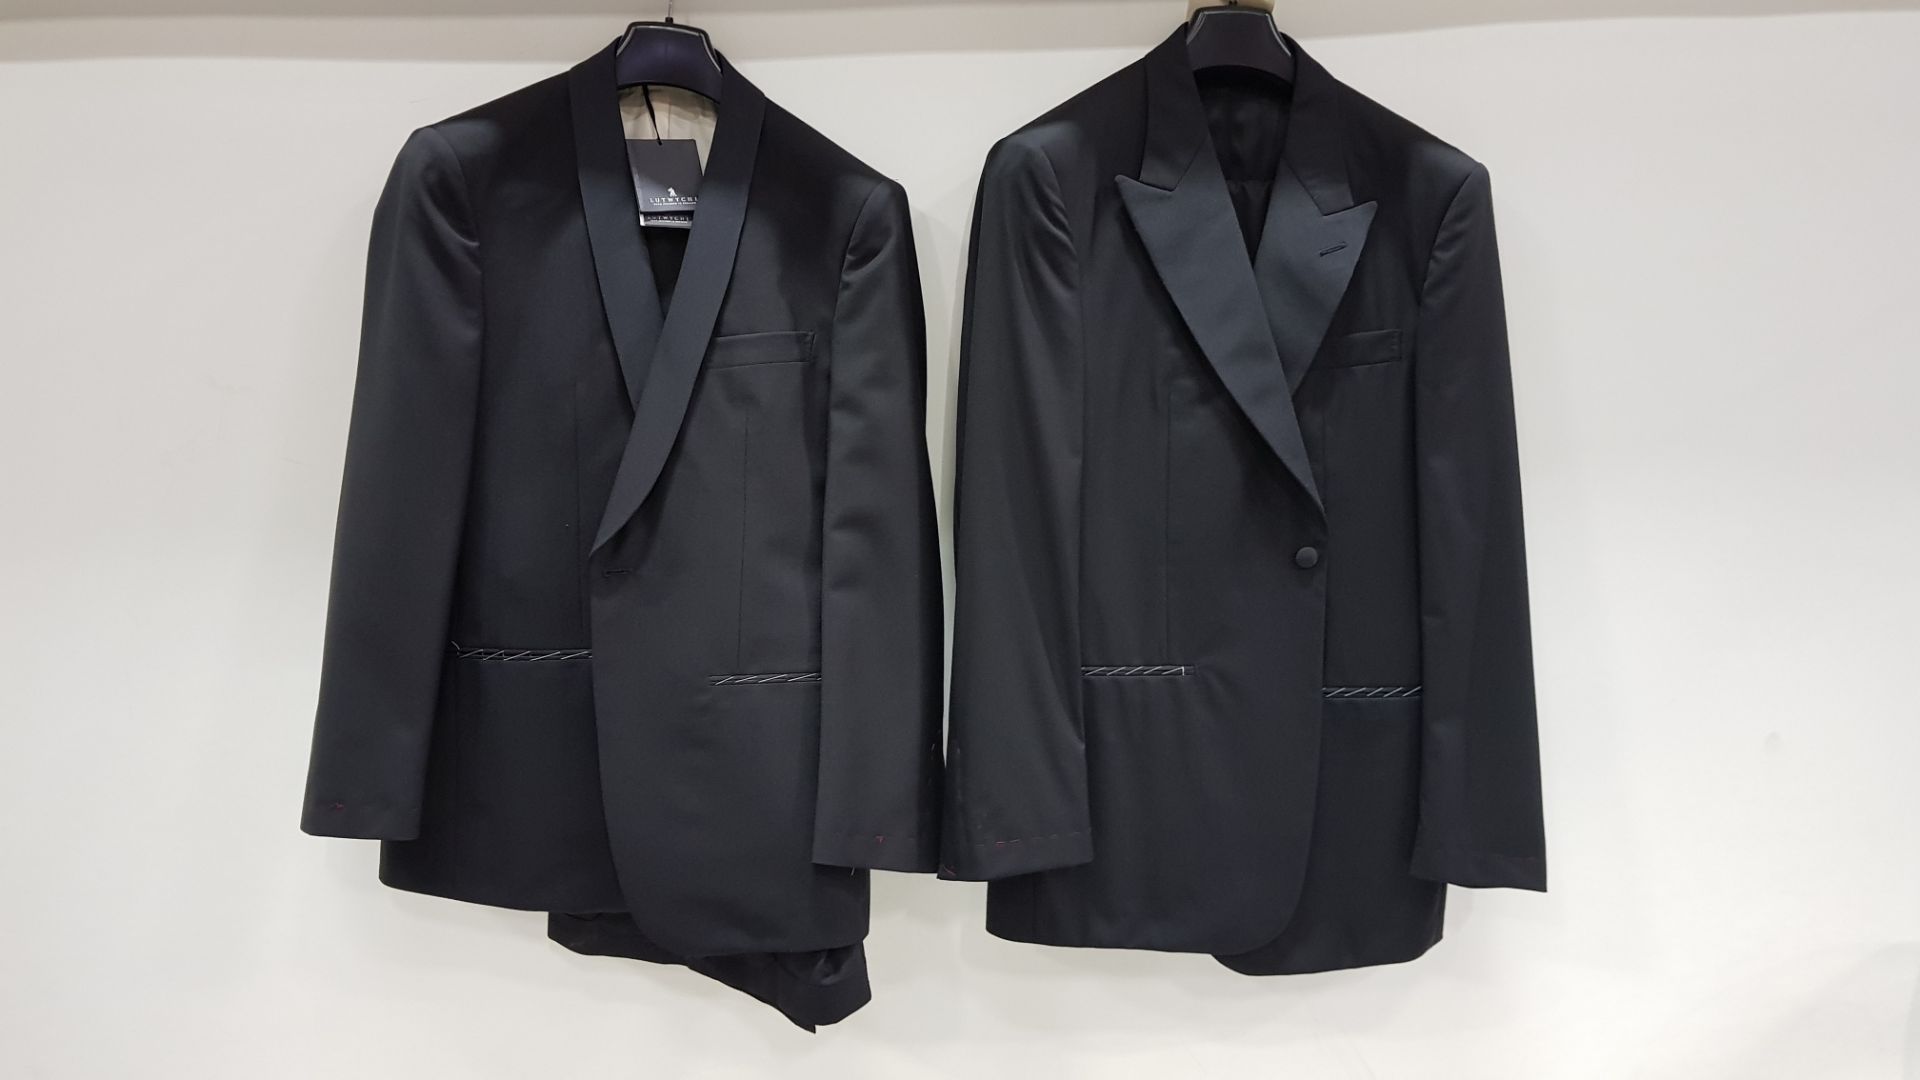 3 X BRAND NEW LUTWYCHE BLACK TAILORED SUITS SIZES 54L, ,52R, 46R (PLEASE NOTE SUITS NOT FULLY